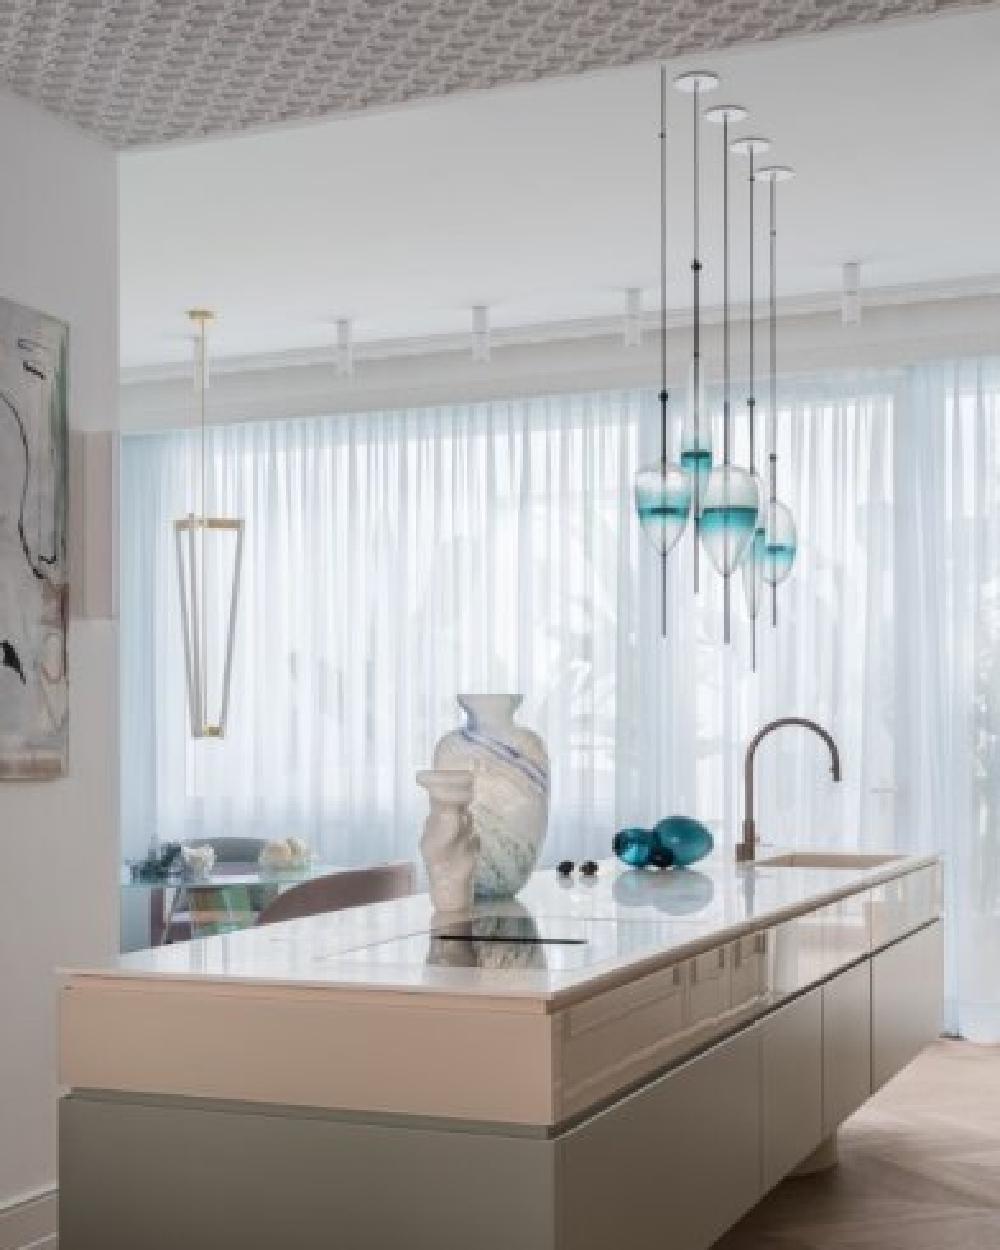 FLOW[T] S1 Pendant lamp in White by Nao Tamura for Wonderglass For Sale 2